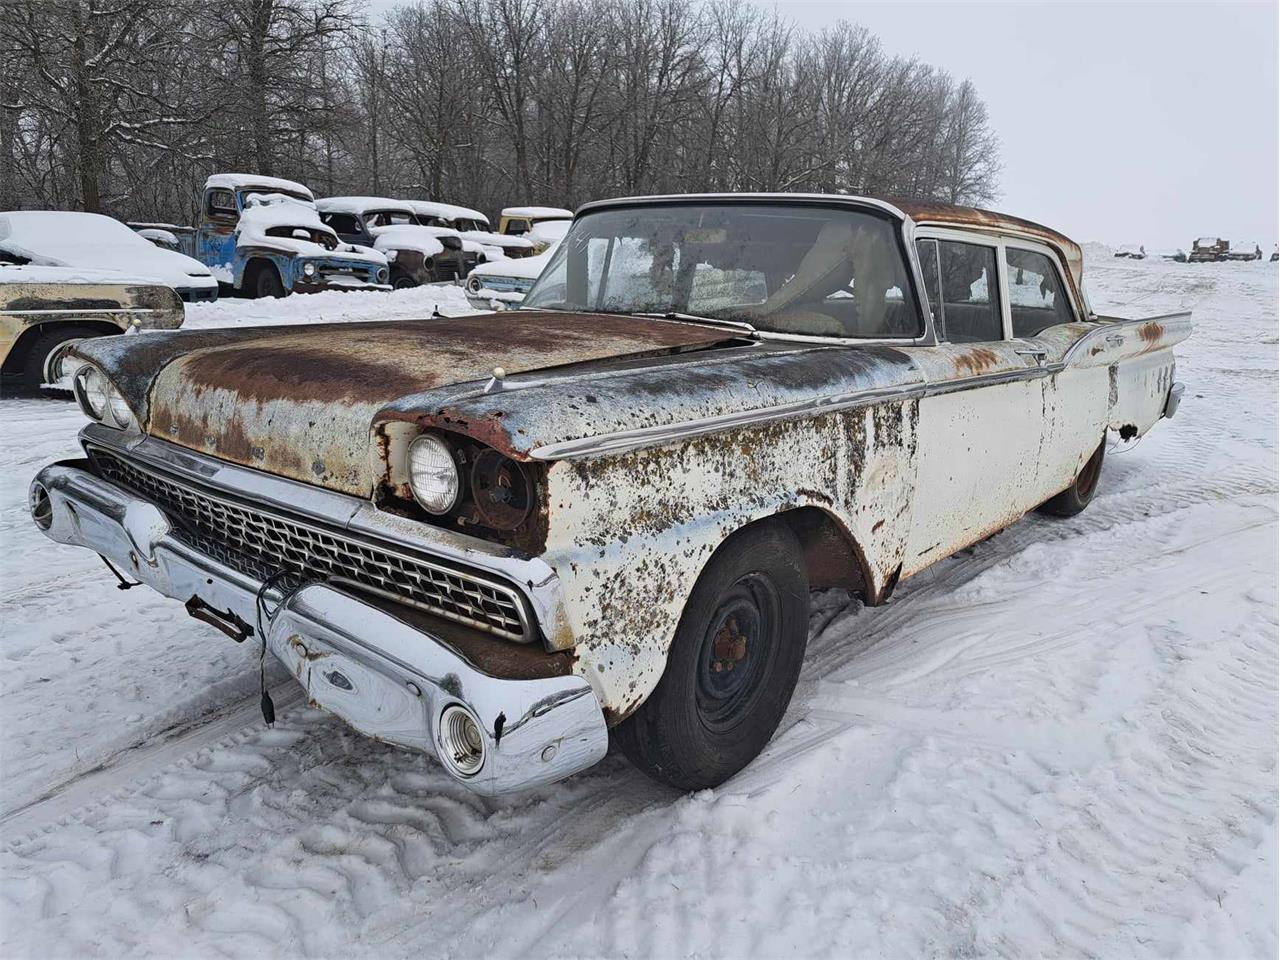 For Sale: 1959 Ford Custom in Thief River Falls, MN, Minnesota for sale in Thief River Falls, MN